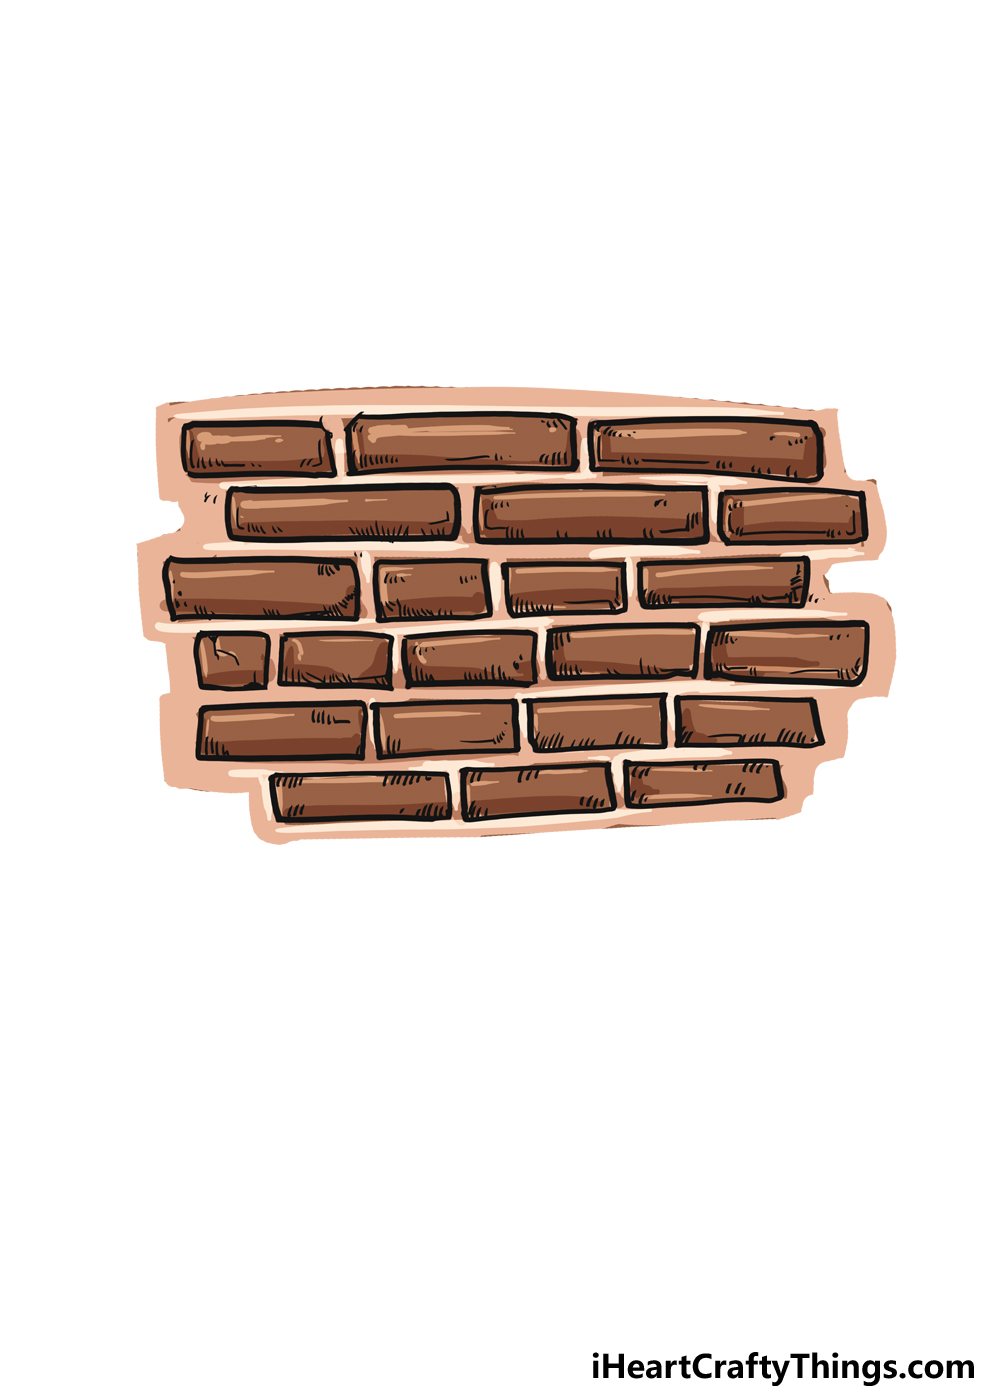 How to Draw A Brick Wall step 6